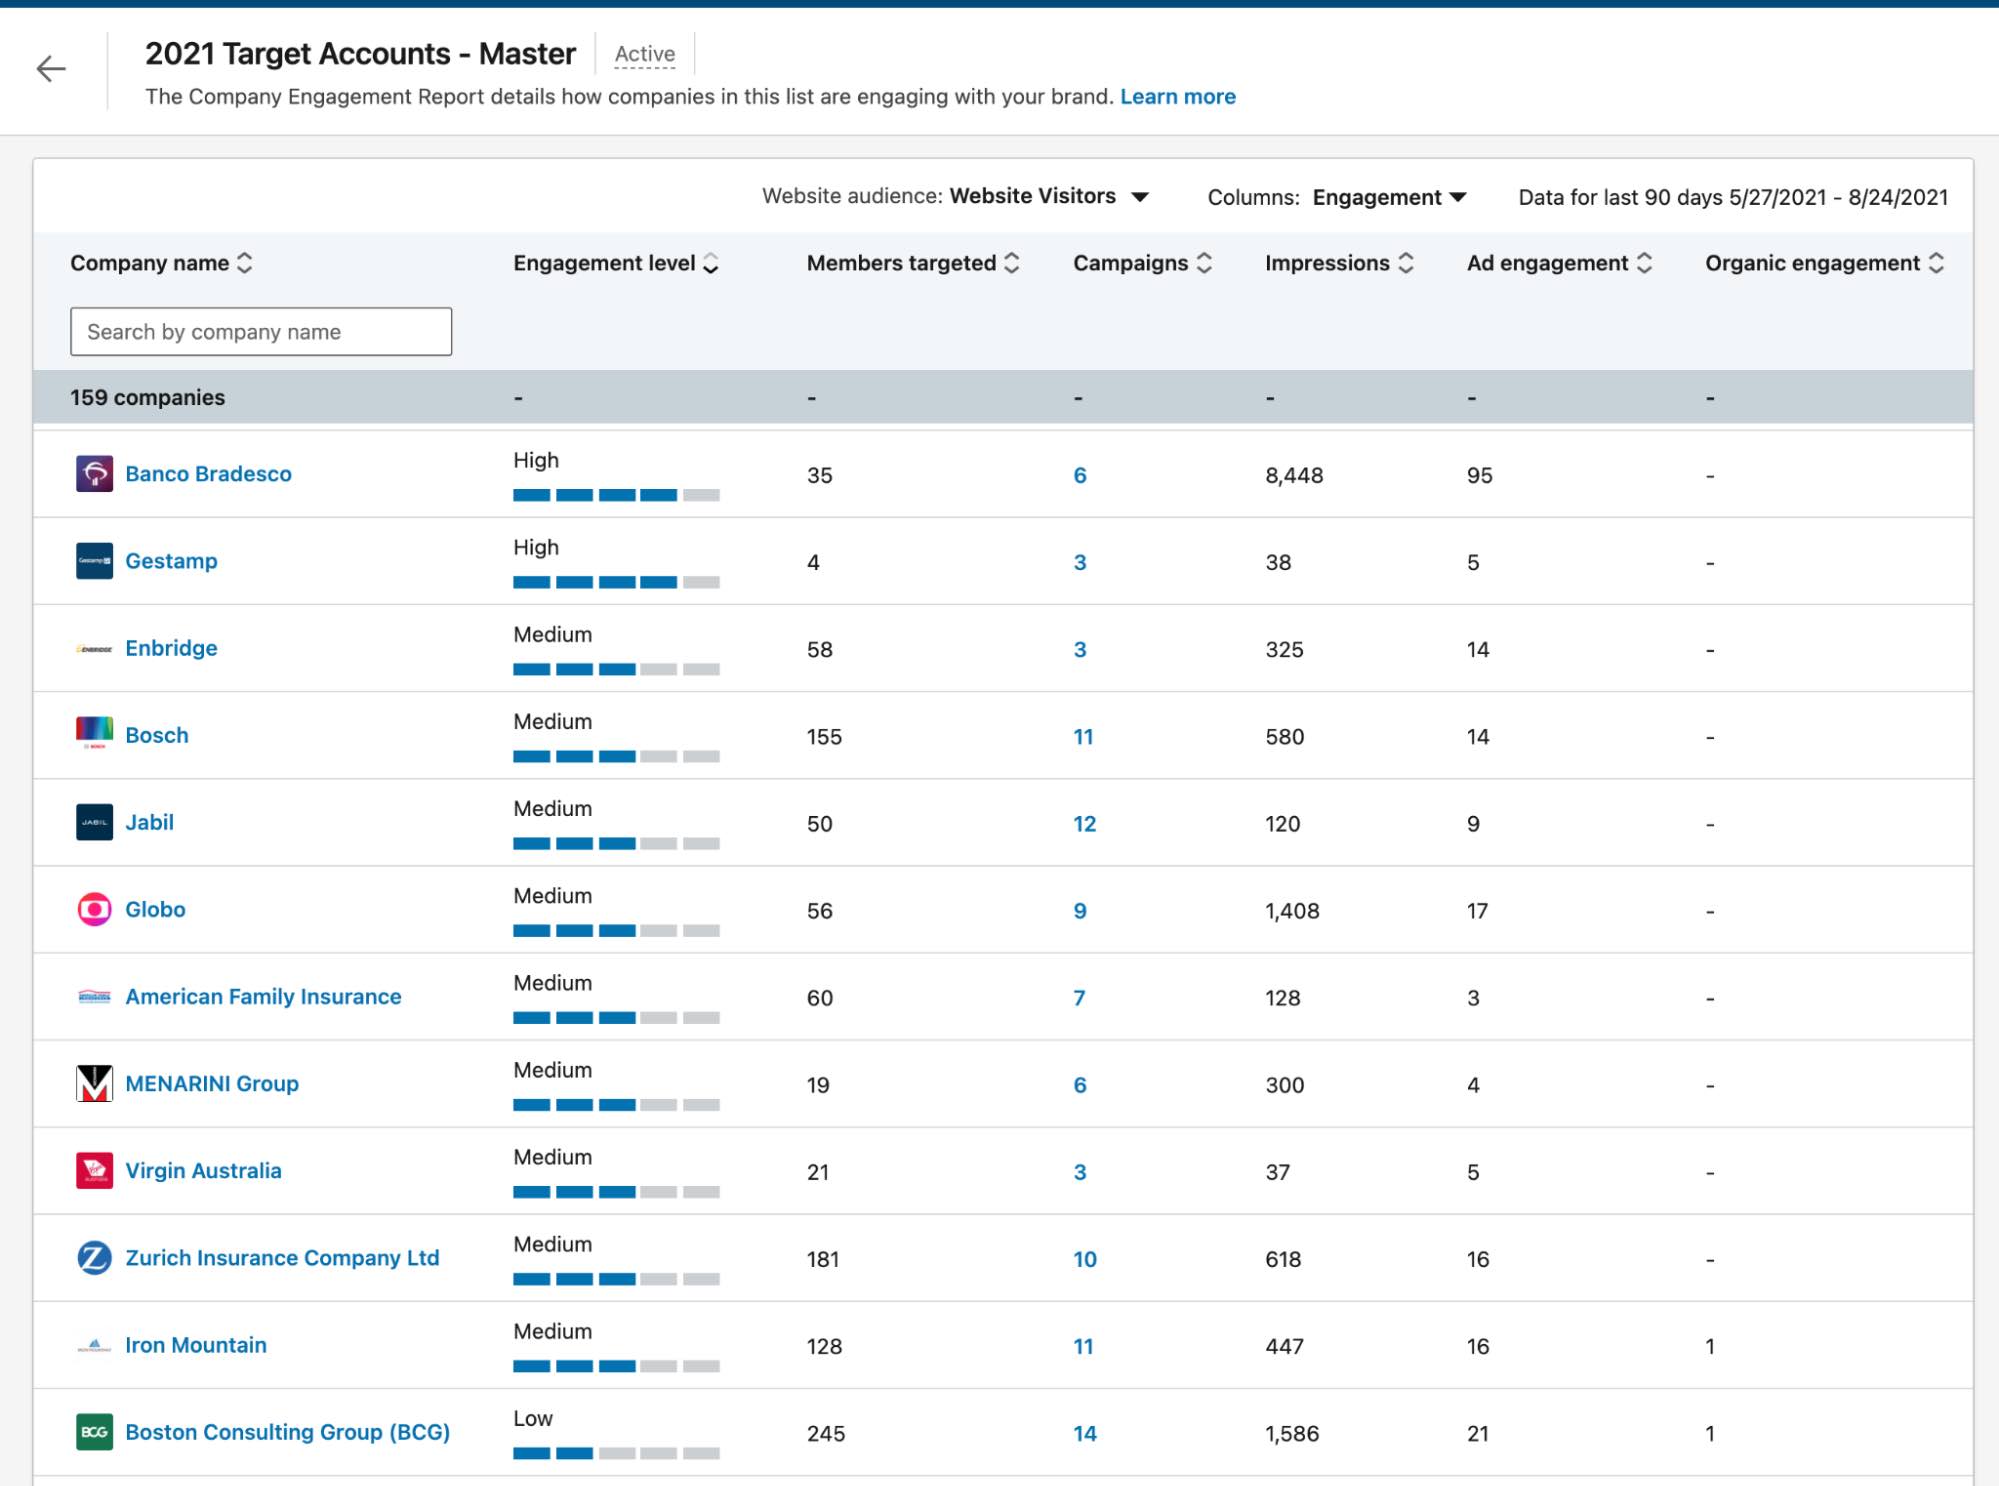 LinkedIn Ads Company Engagement Report showing engagement level, members targeted, campaigns, impressions, ad engagement, and organic engagement for each company